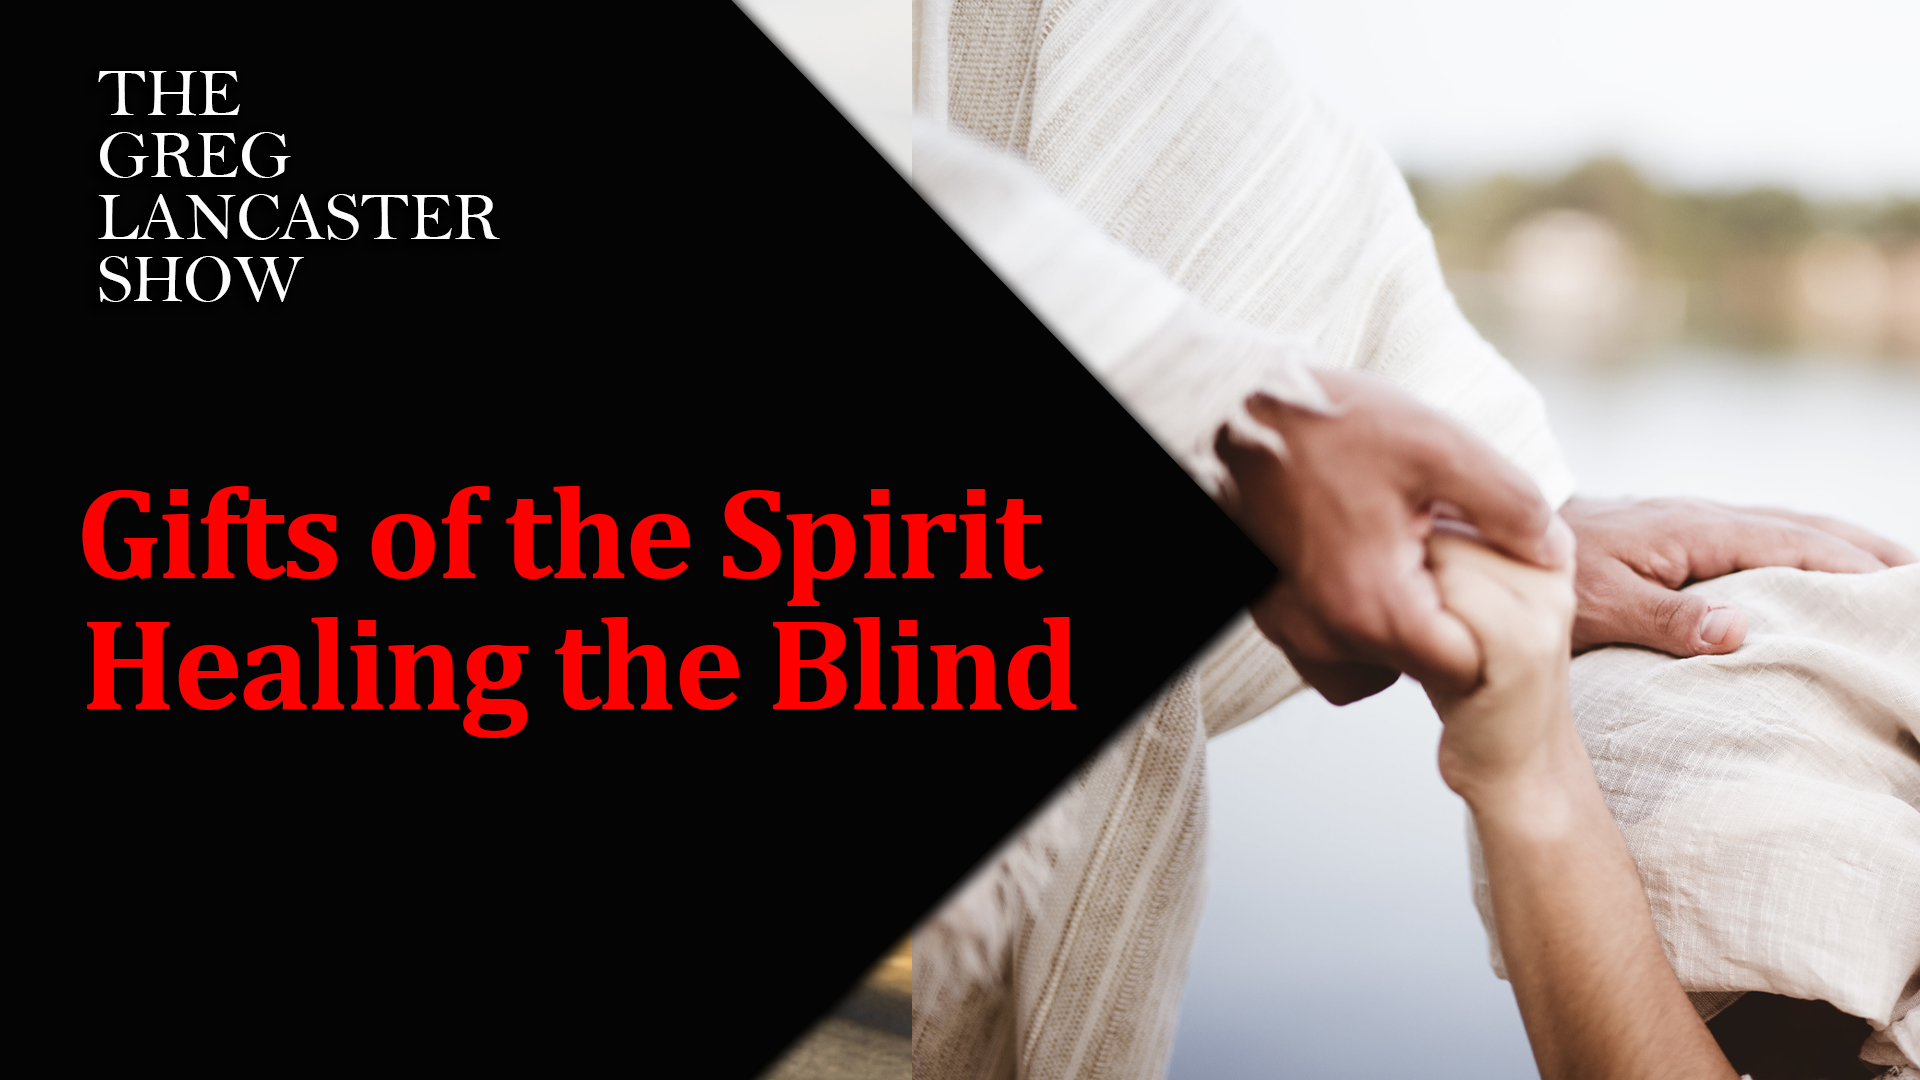 10-26-21 Gifts of the Spirit Healing the Blind